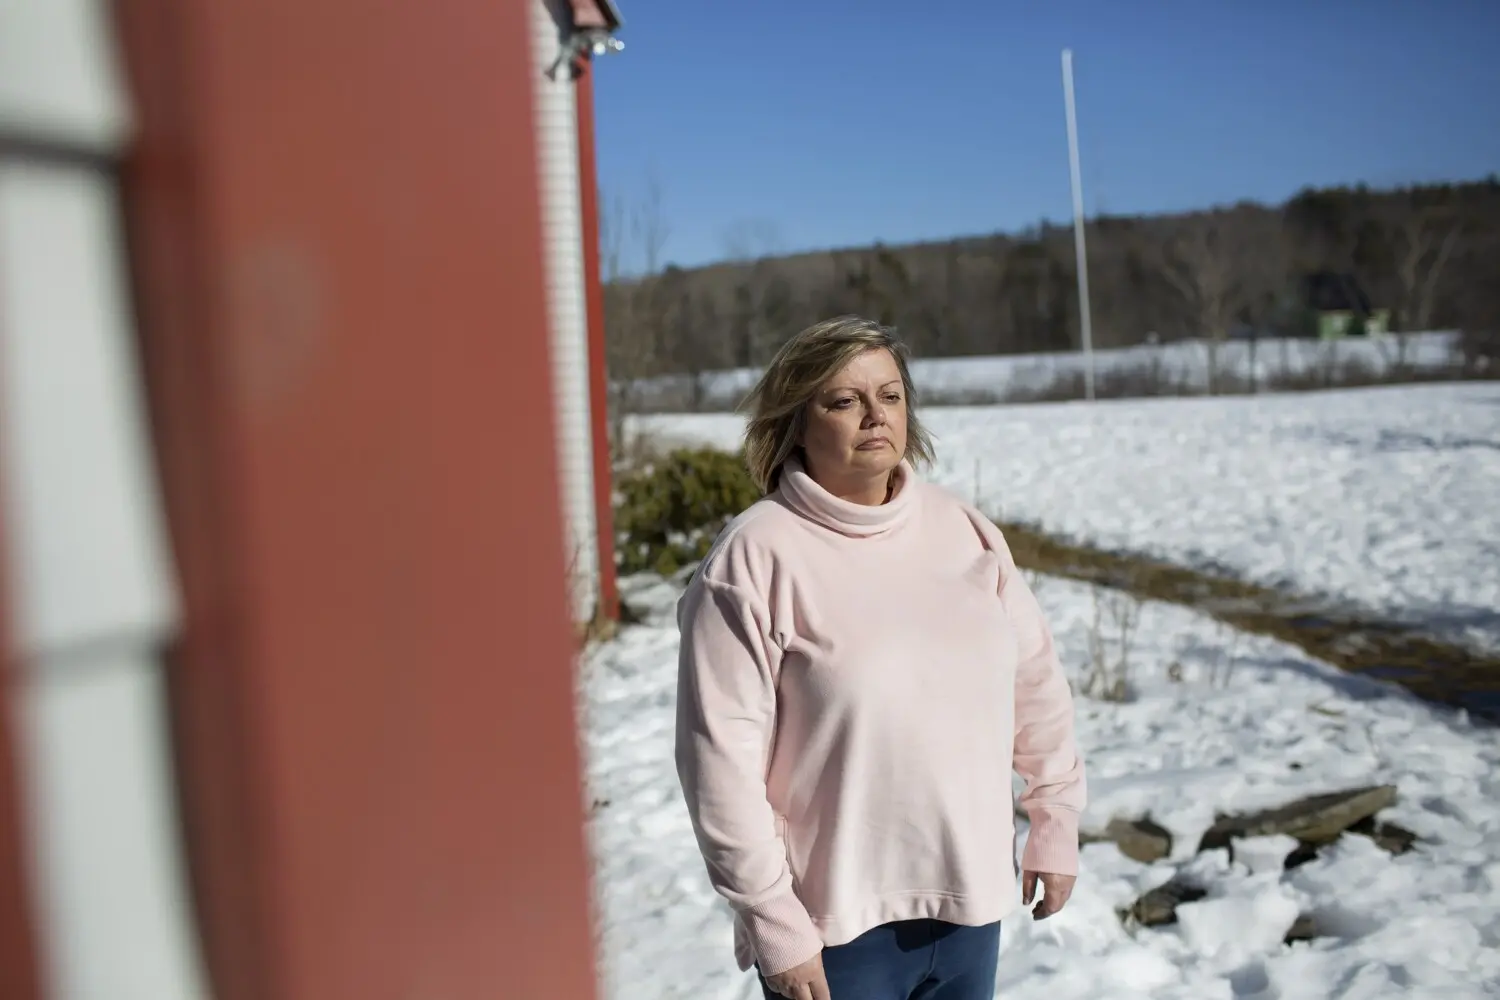 Amy Burns stands outside of her home, in a snowy yard.